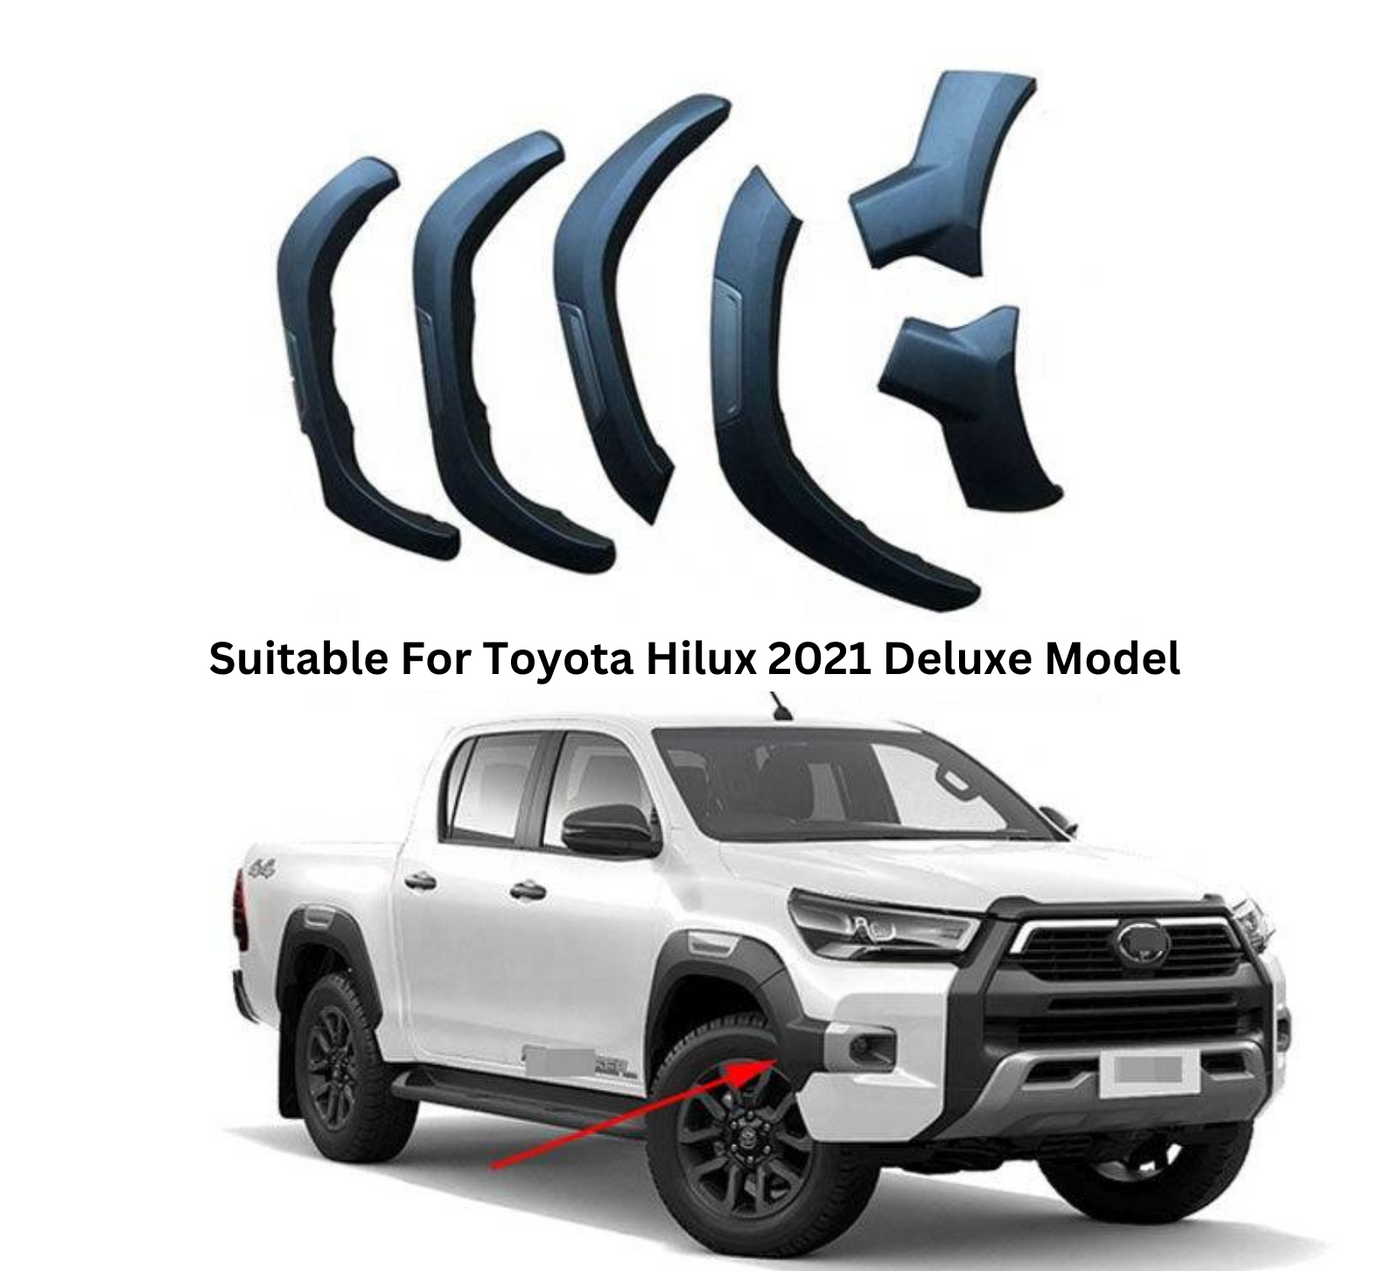 OEM Fender Flares Suitable for Toyota Hilux Rocco 2020+ - OZI4X4 PTY LTD